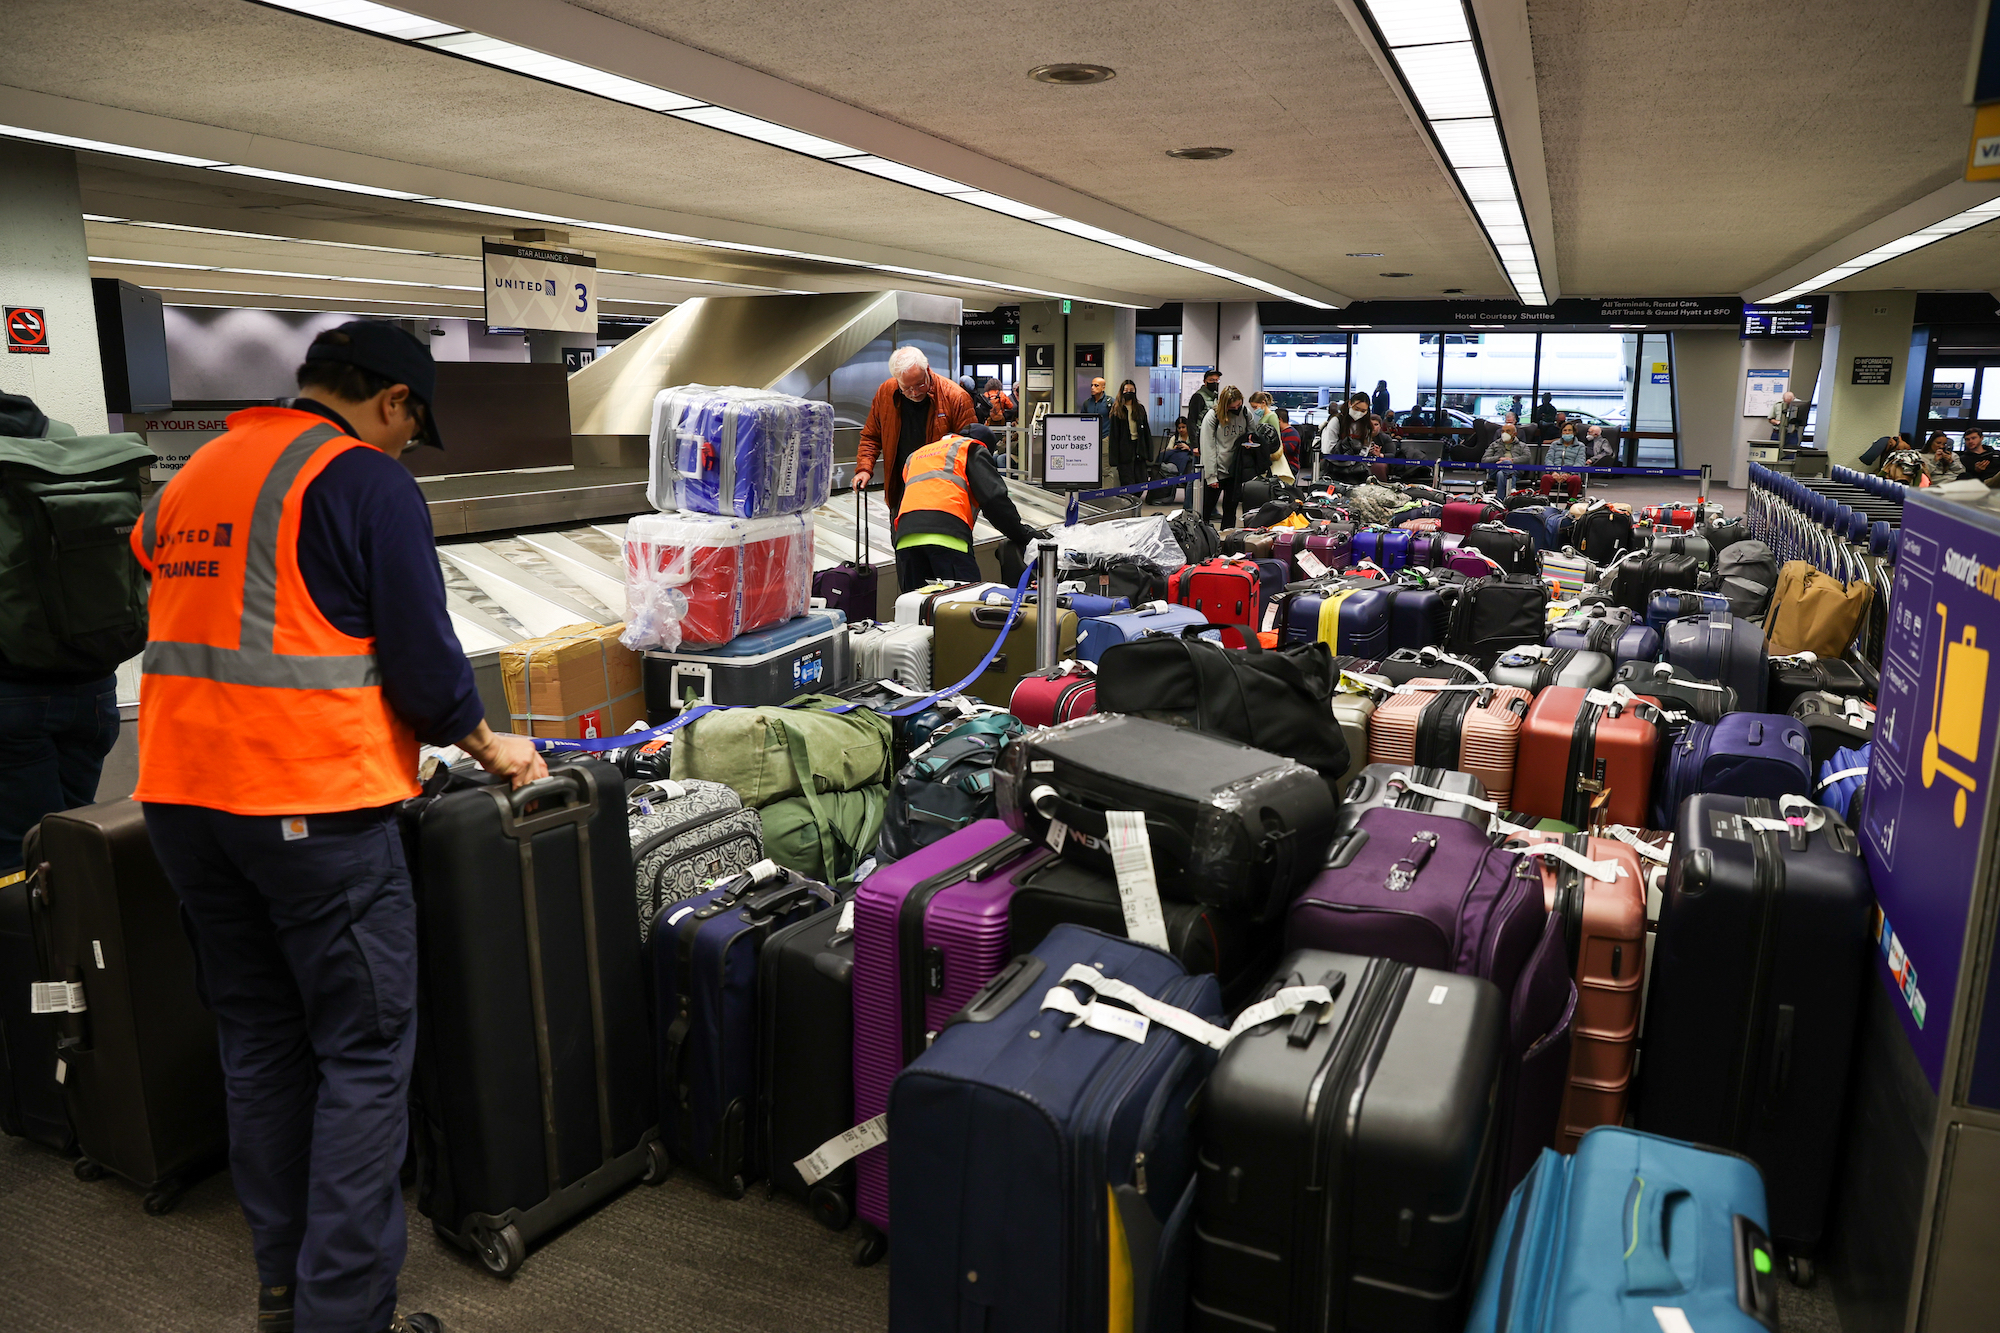 More than 1,600 flight cancellations nationwide so far on Saturday